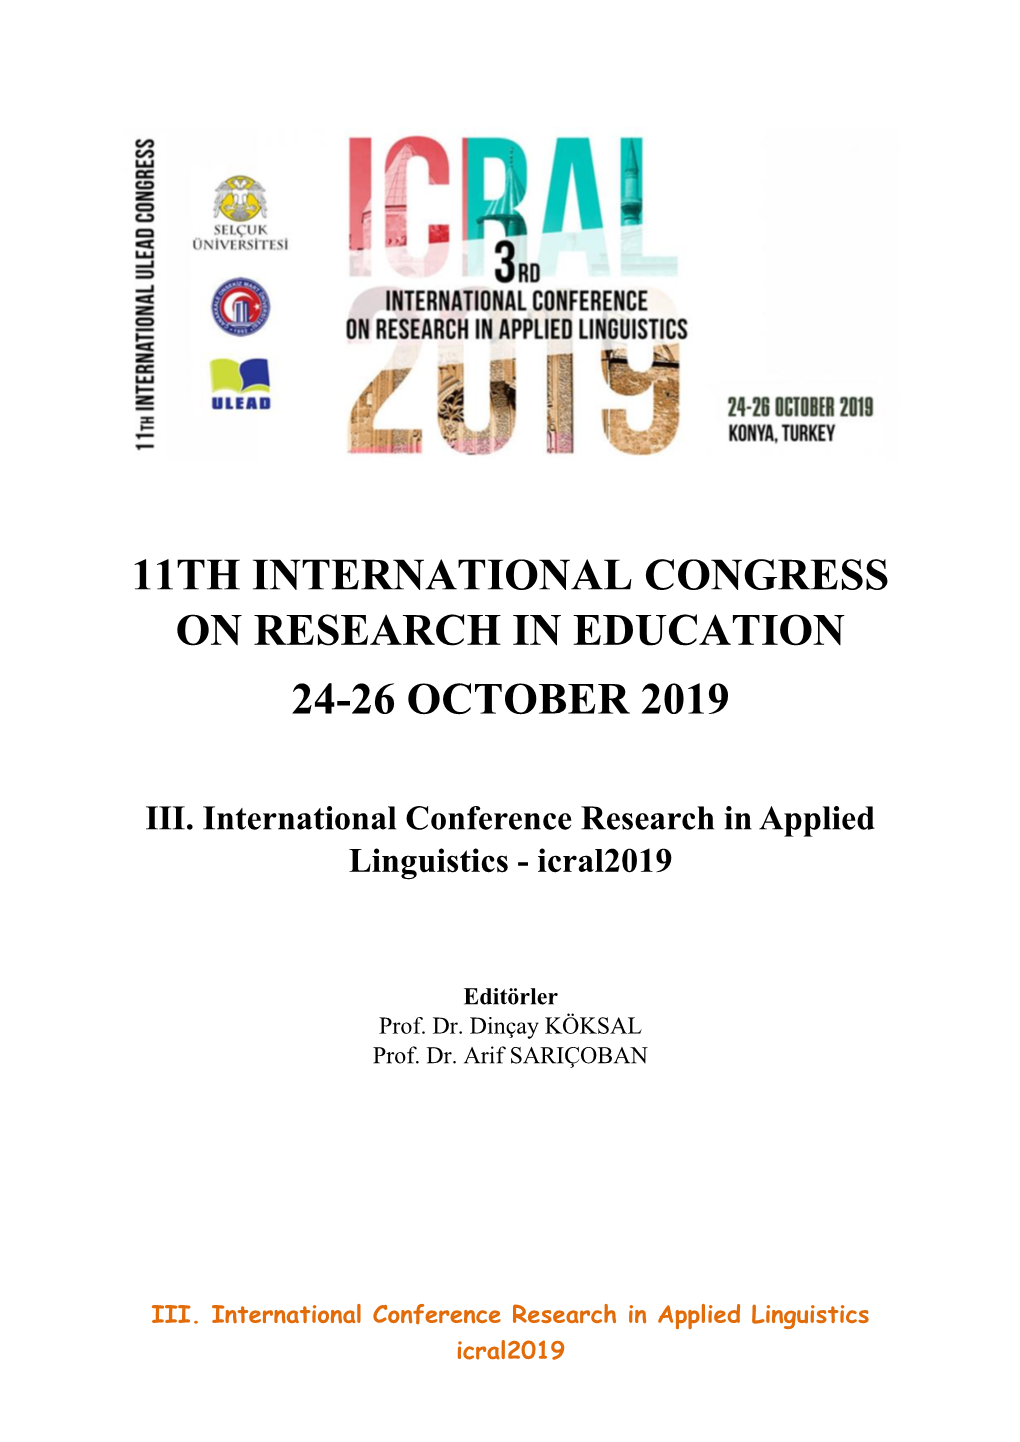 11Th International Congress on Research in Education 24-26 October 2019